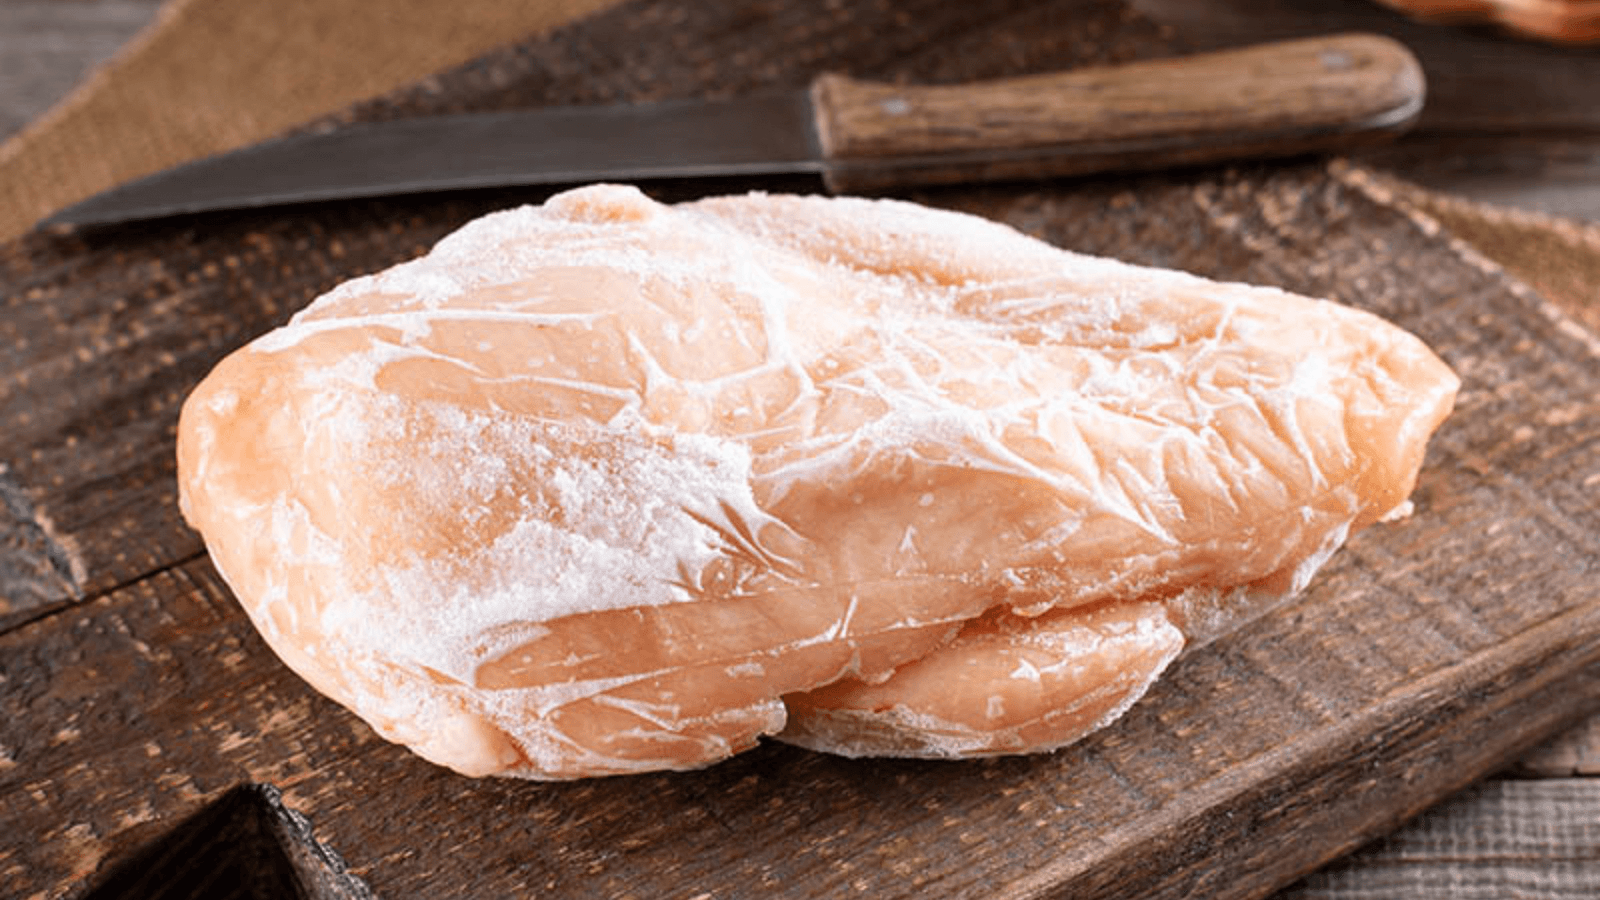 Frozen Stuffed Chicken Cooked In Microwave A Key Driver Of Salmonella Infection